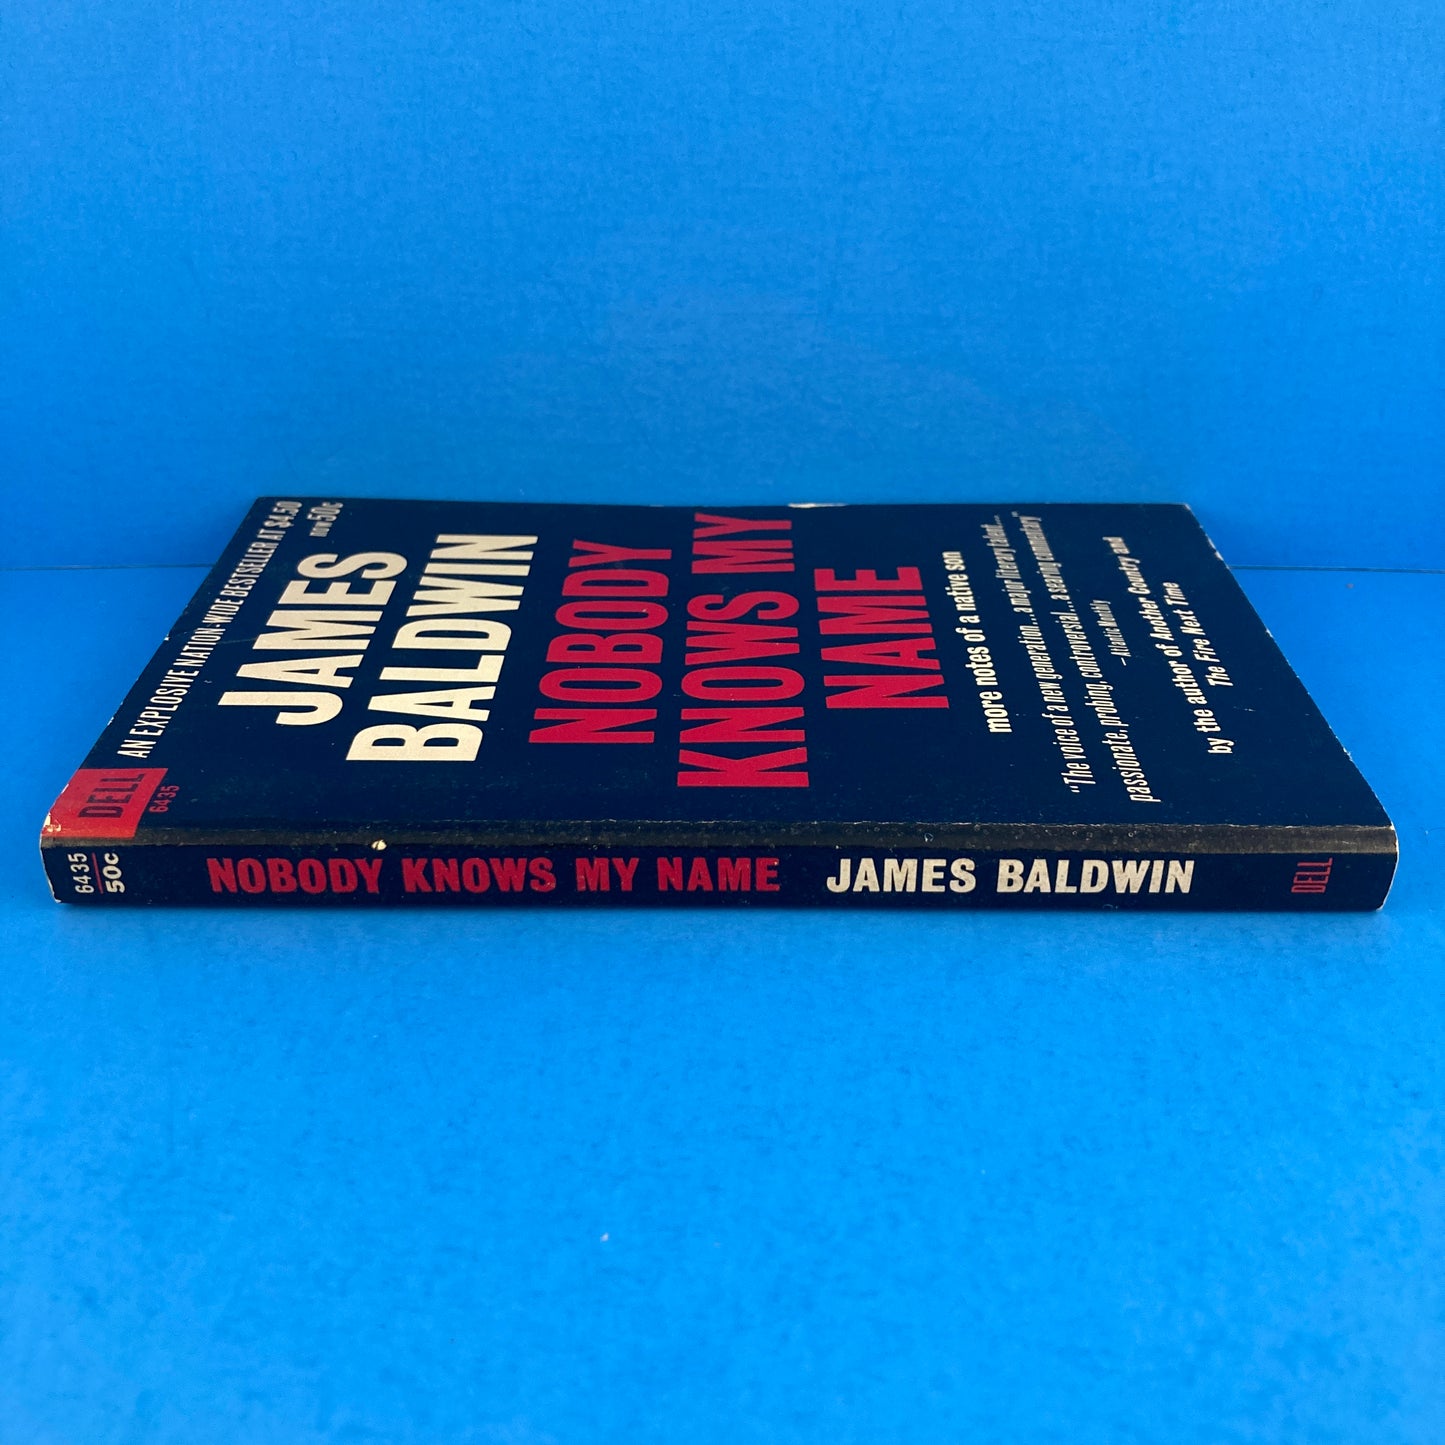 Nobody Knows My Name: More Notes of a Native Son